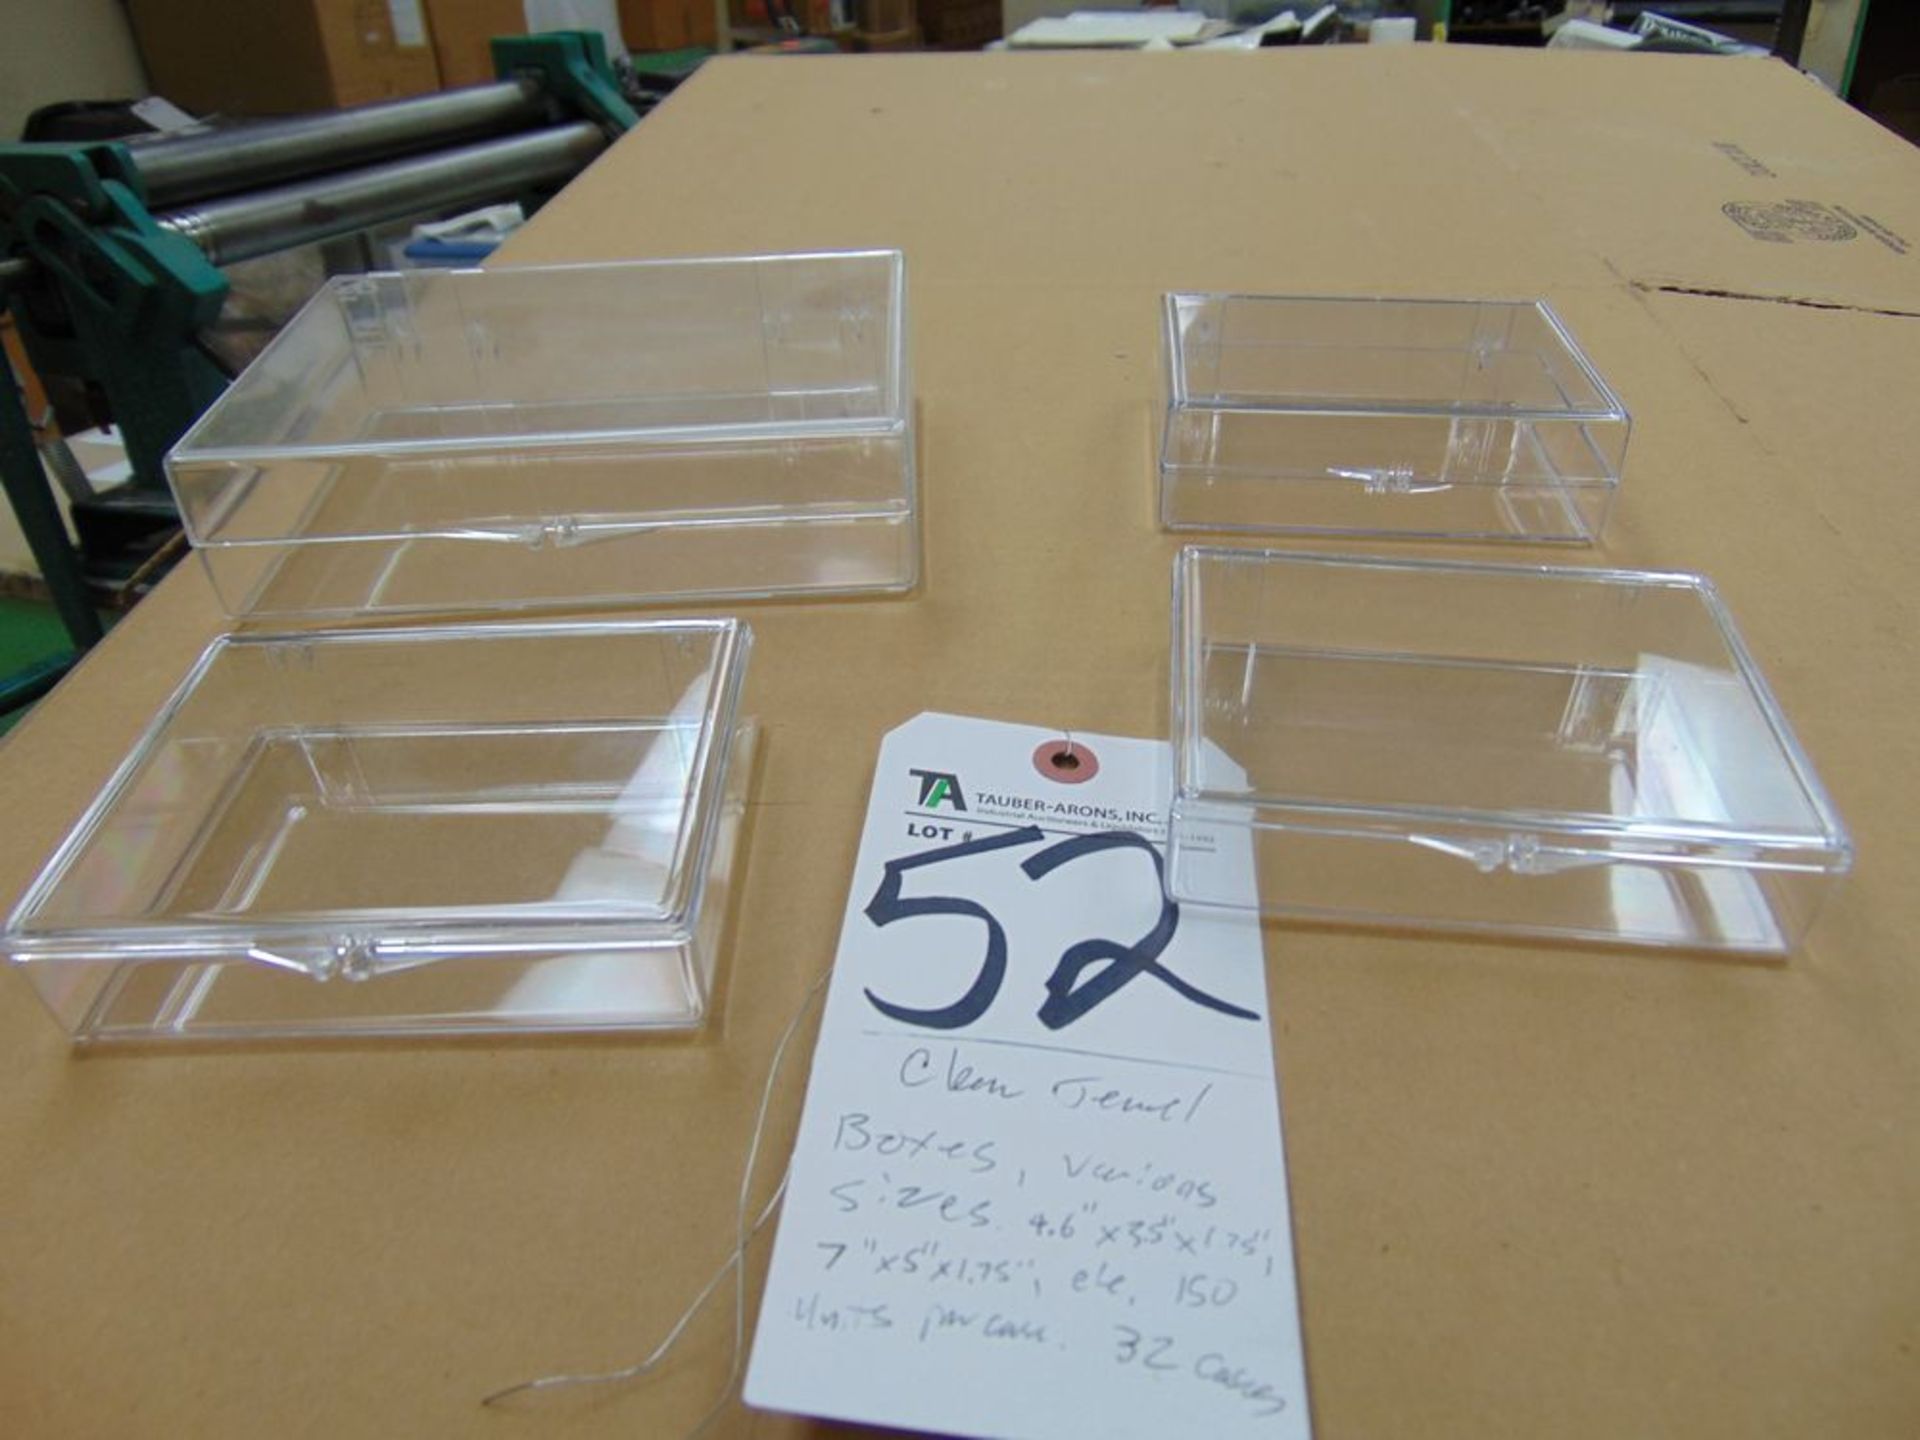 (Lot) Clear Jewel Boxes of Various Sizes, 4.6'' x 3.5'' x 1.25'', 7'' x 5'' x 1.75'', etc. (150)